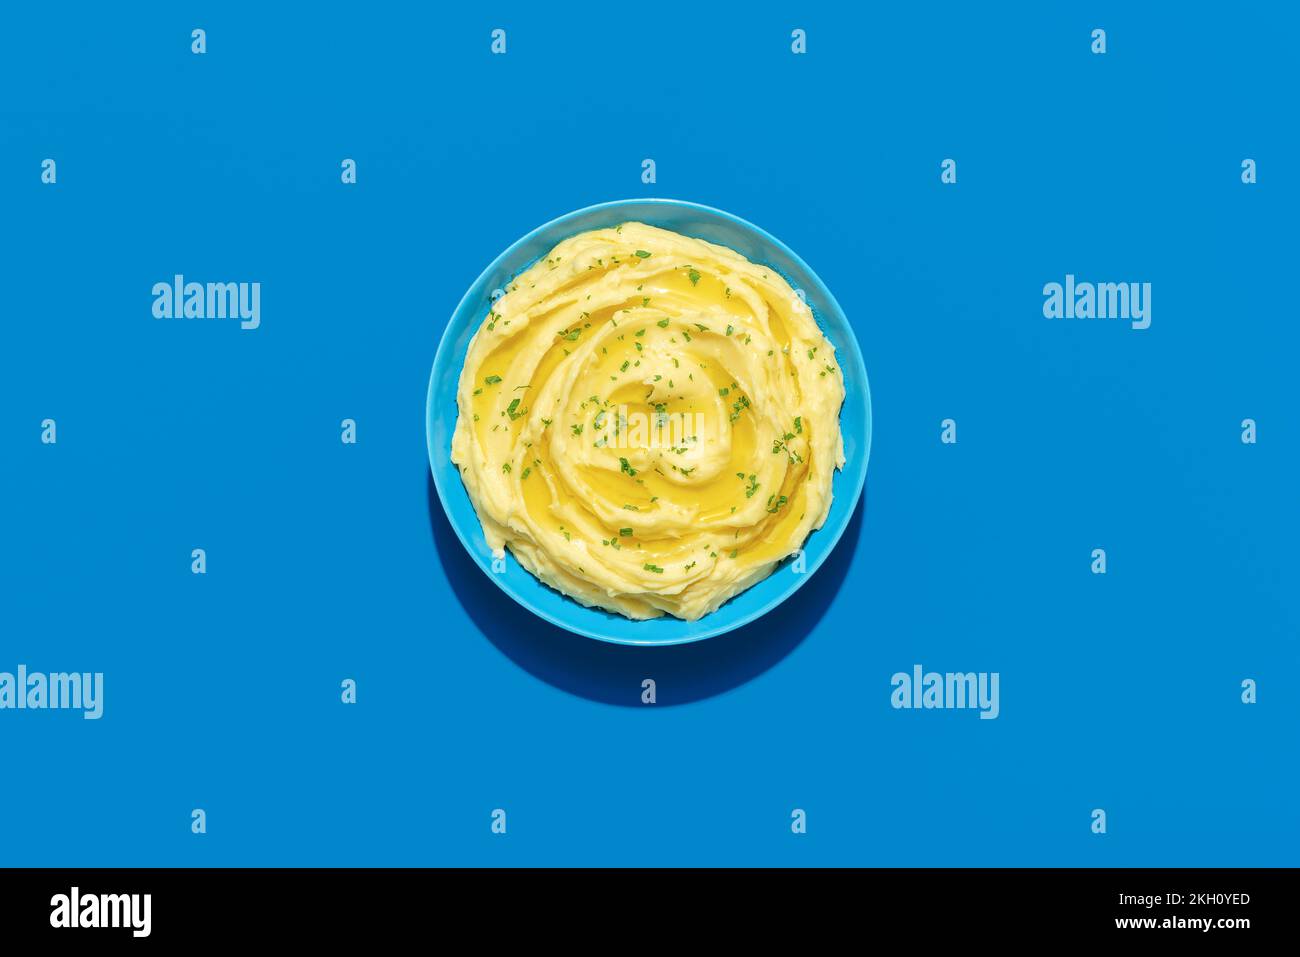 Top view with a bowl with mashed potatoes, minimalist on a blue background. Creamy mashed potatoes with olive oil and parsley. Stock Photo